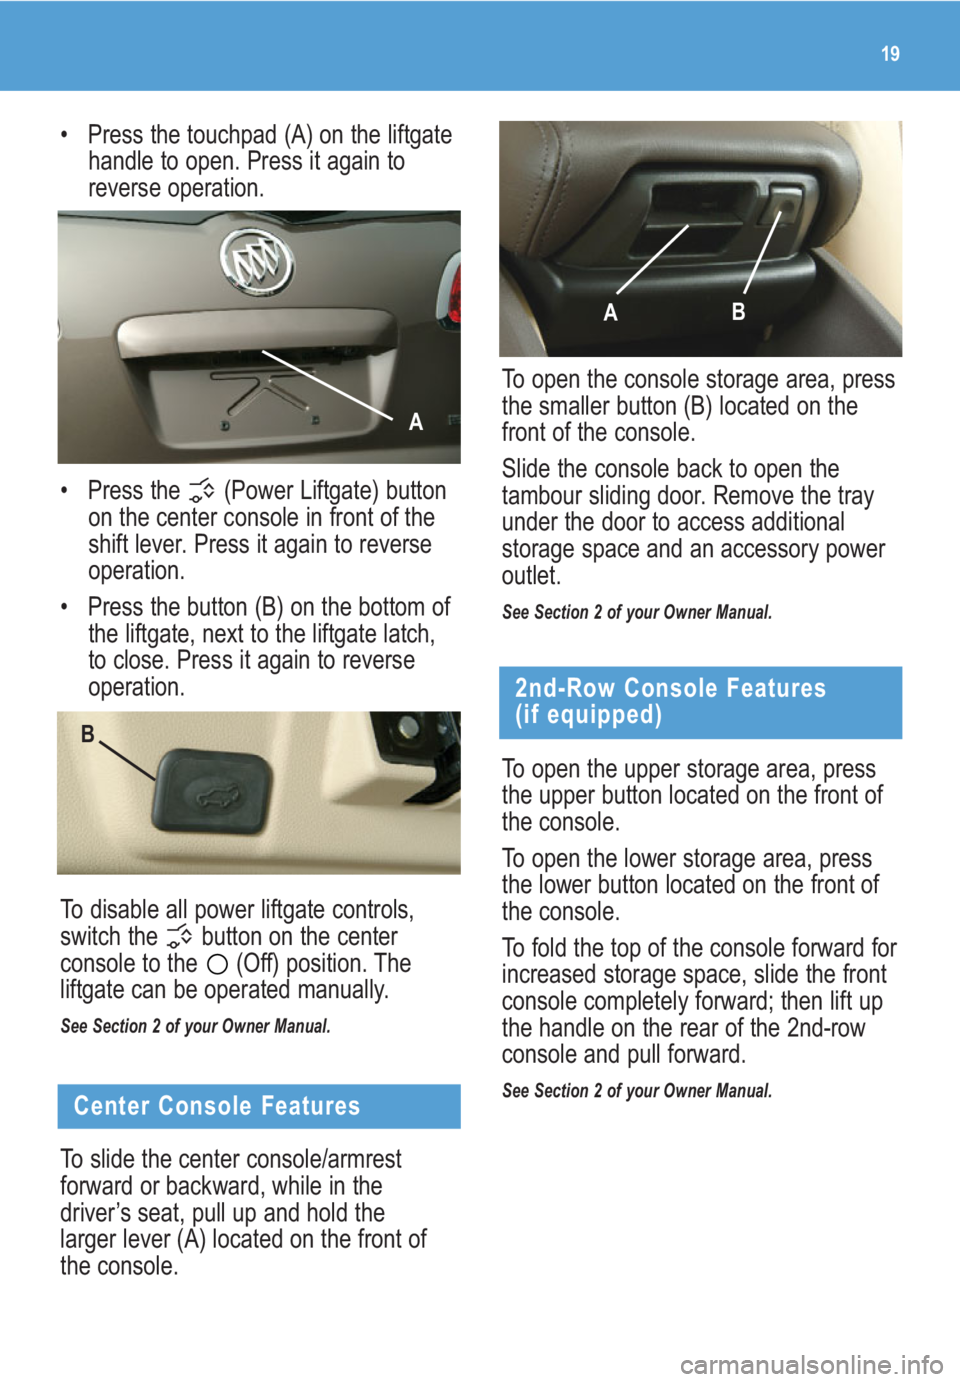 BUICK ENCLAVE 2009  Get To Know Guide 19
Center Console Features
To slide the center console/armrest
forward or backward, while in the
driver’s seat, pull up and hold the
larger lever (A) located on the front of
the console. • Press t